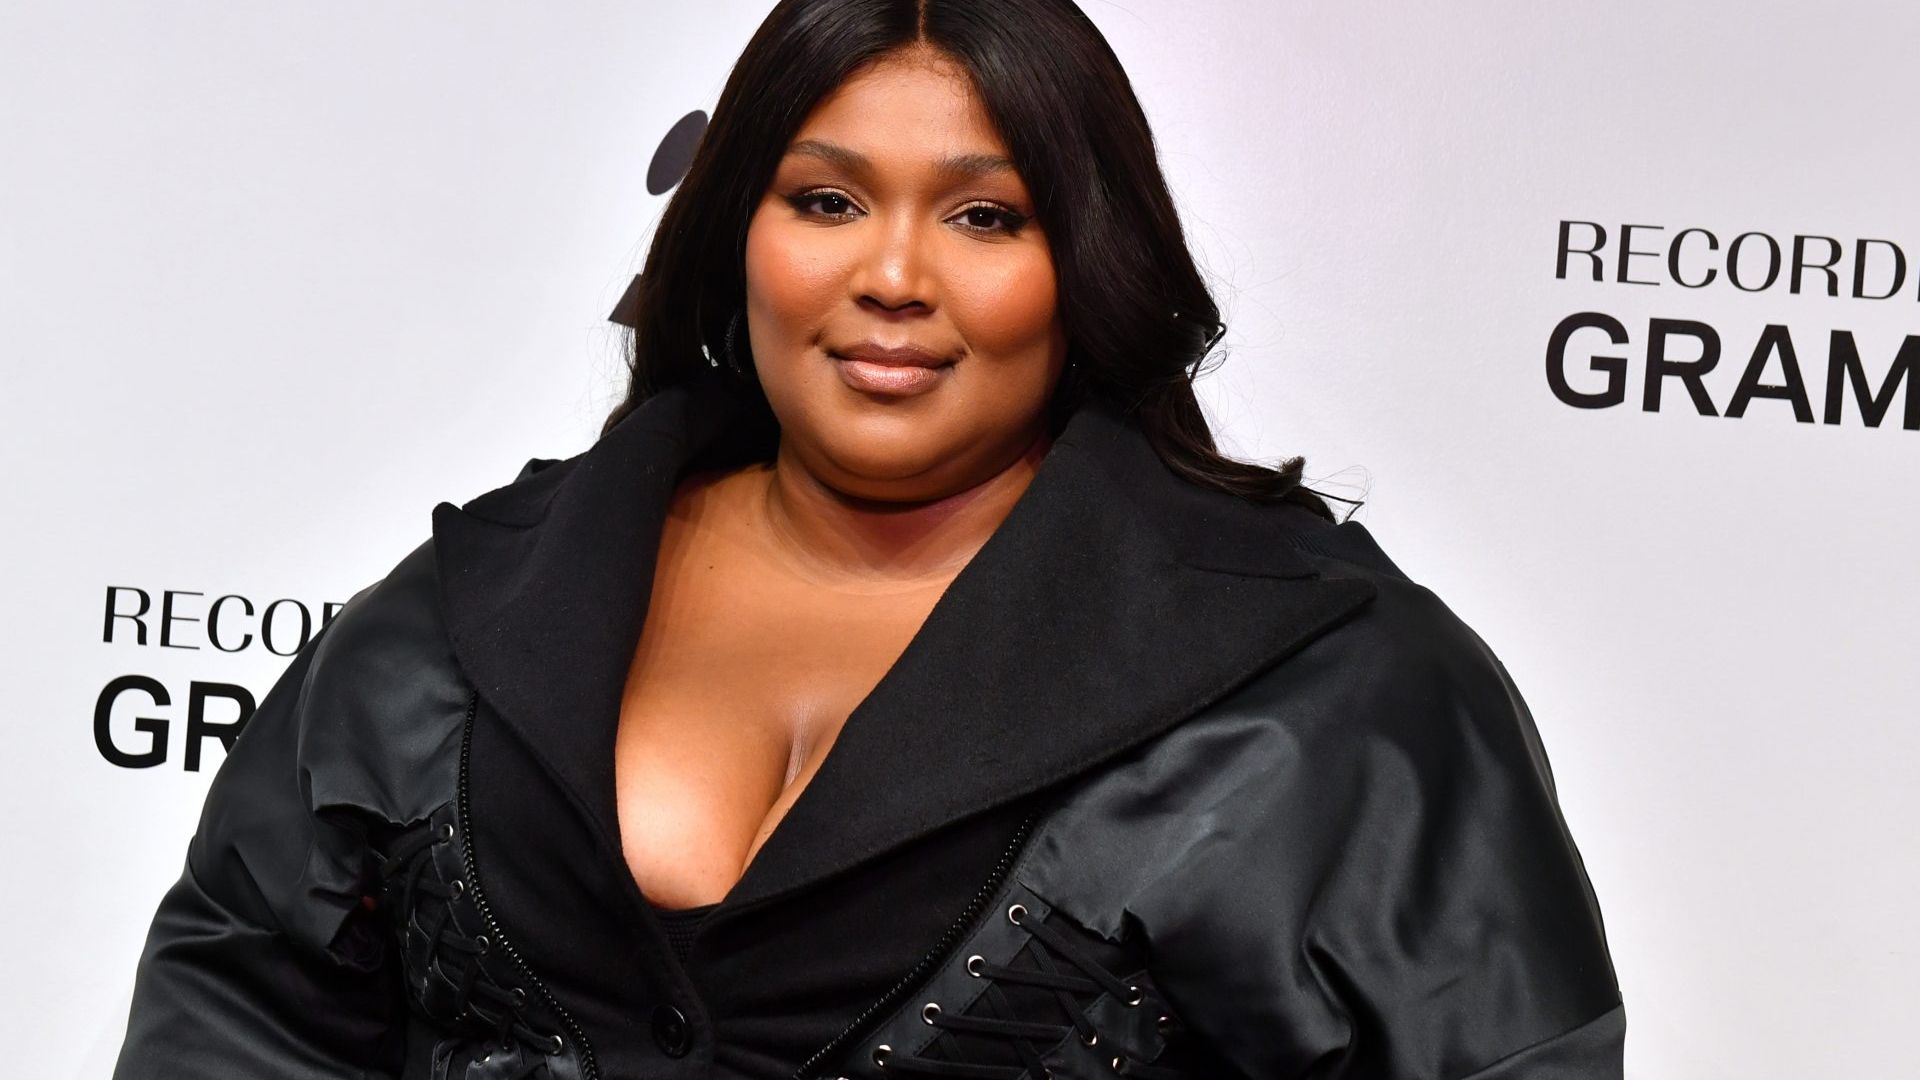 Lizzo calls out body-shamers and says nasty comments on social media should cost money